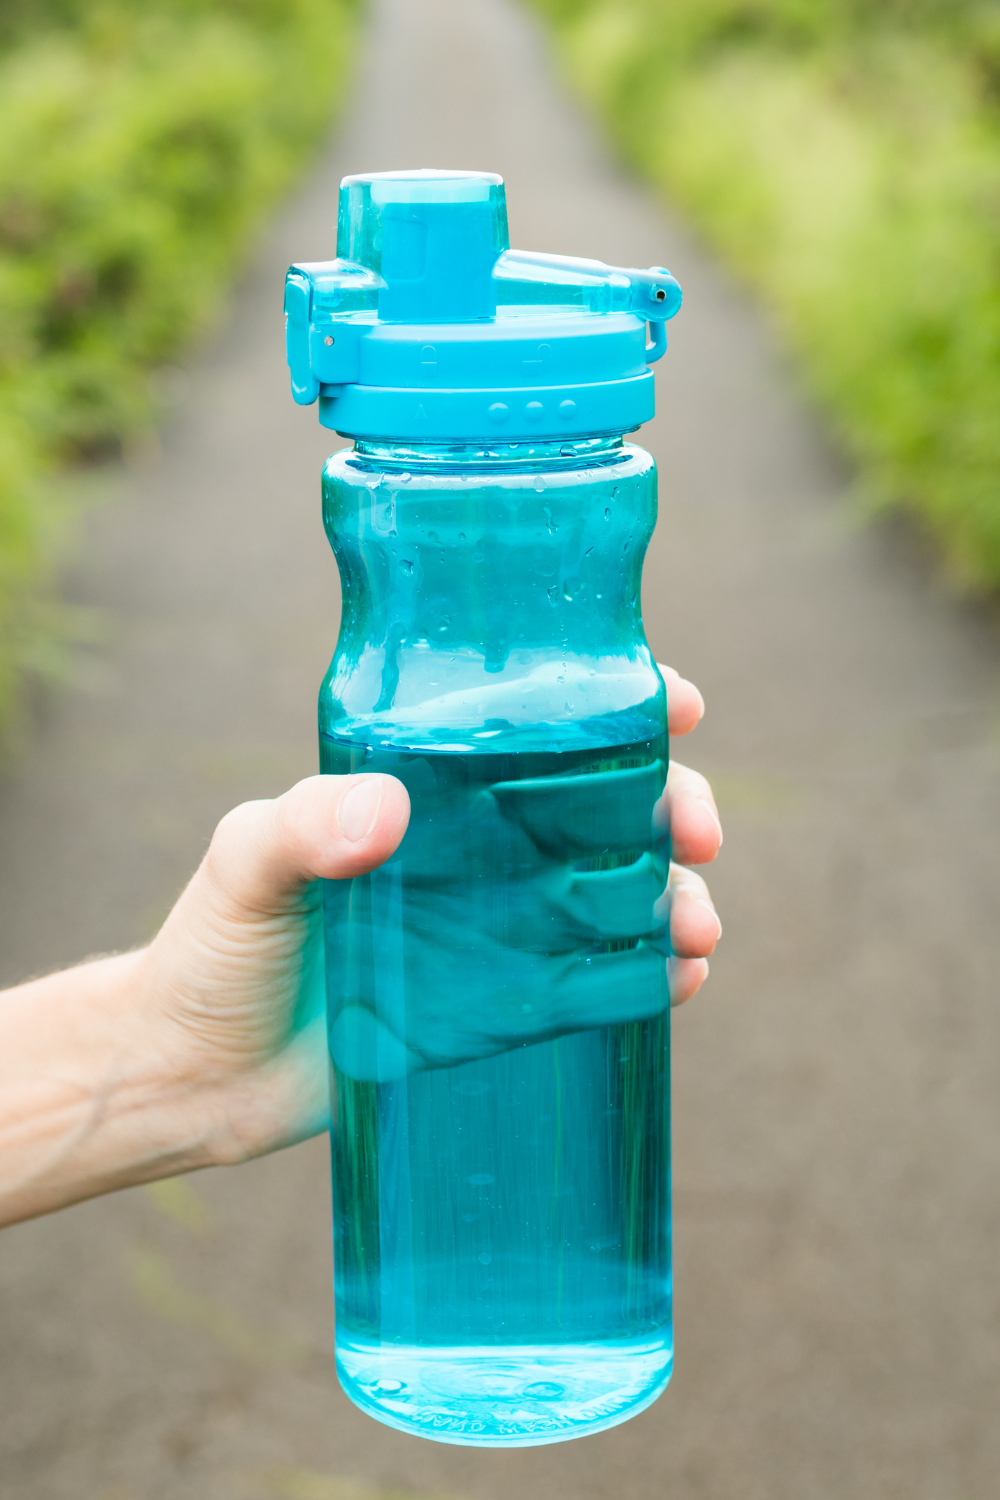 Can I Put Hot Water In Plastic Water Bottles?